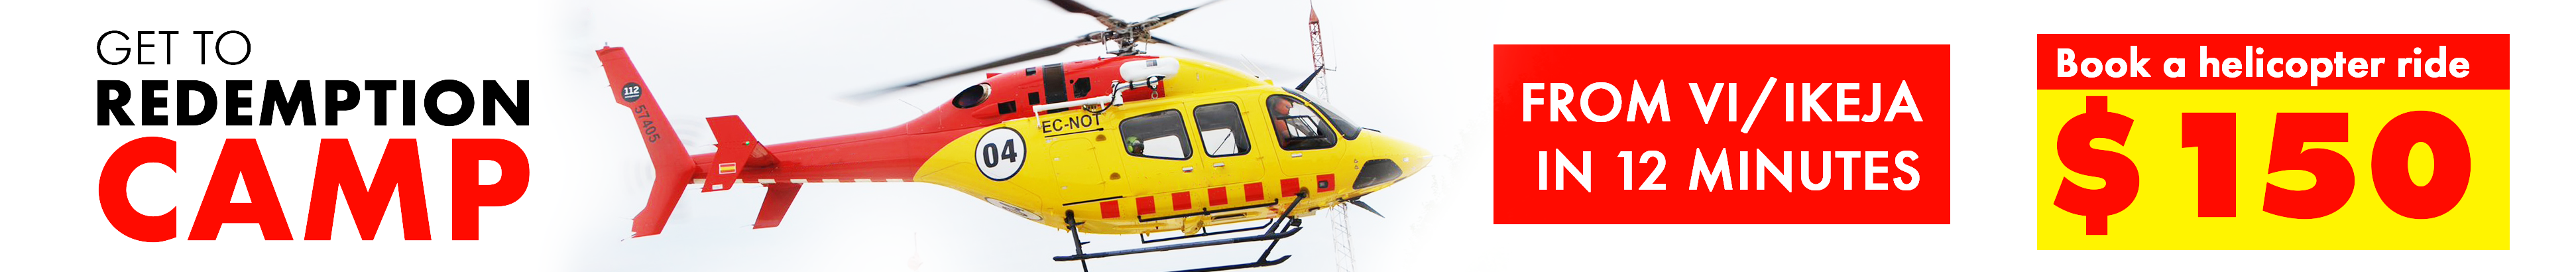 Book a helicopter ride Banner